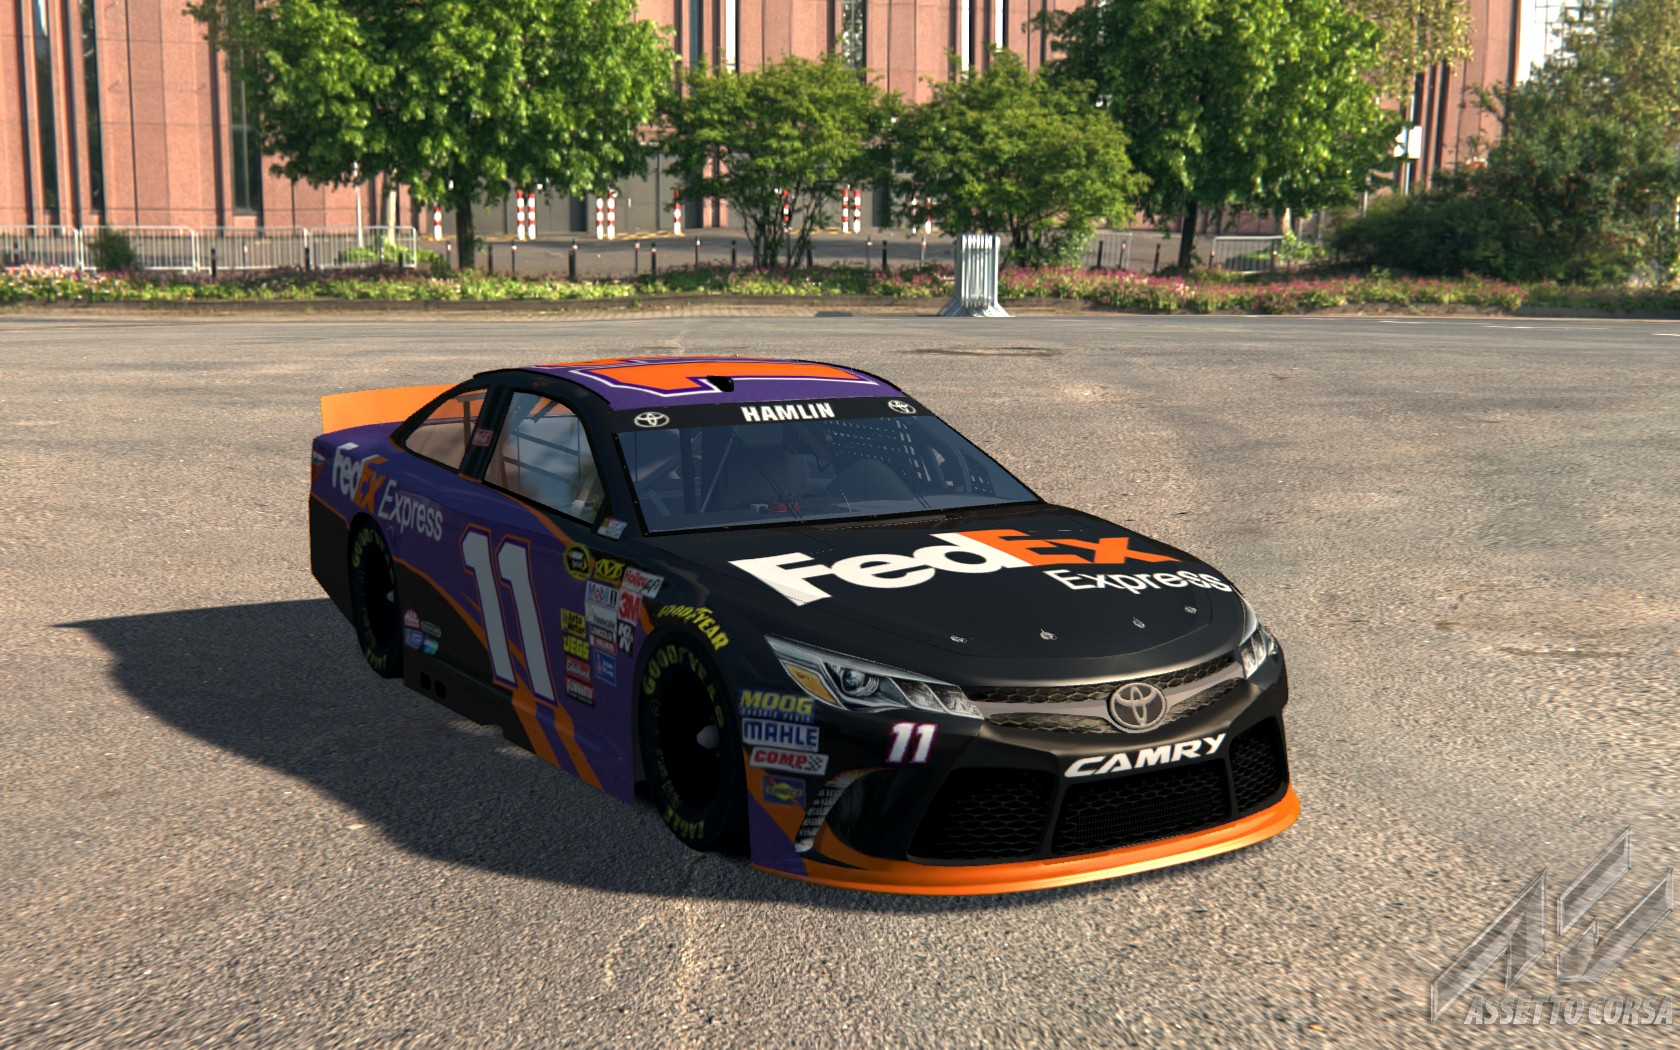 Toyota Camry Nascar Preview Image